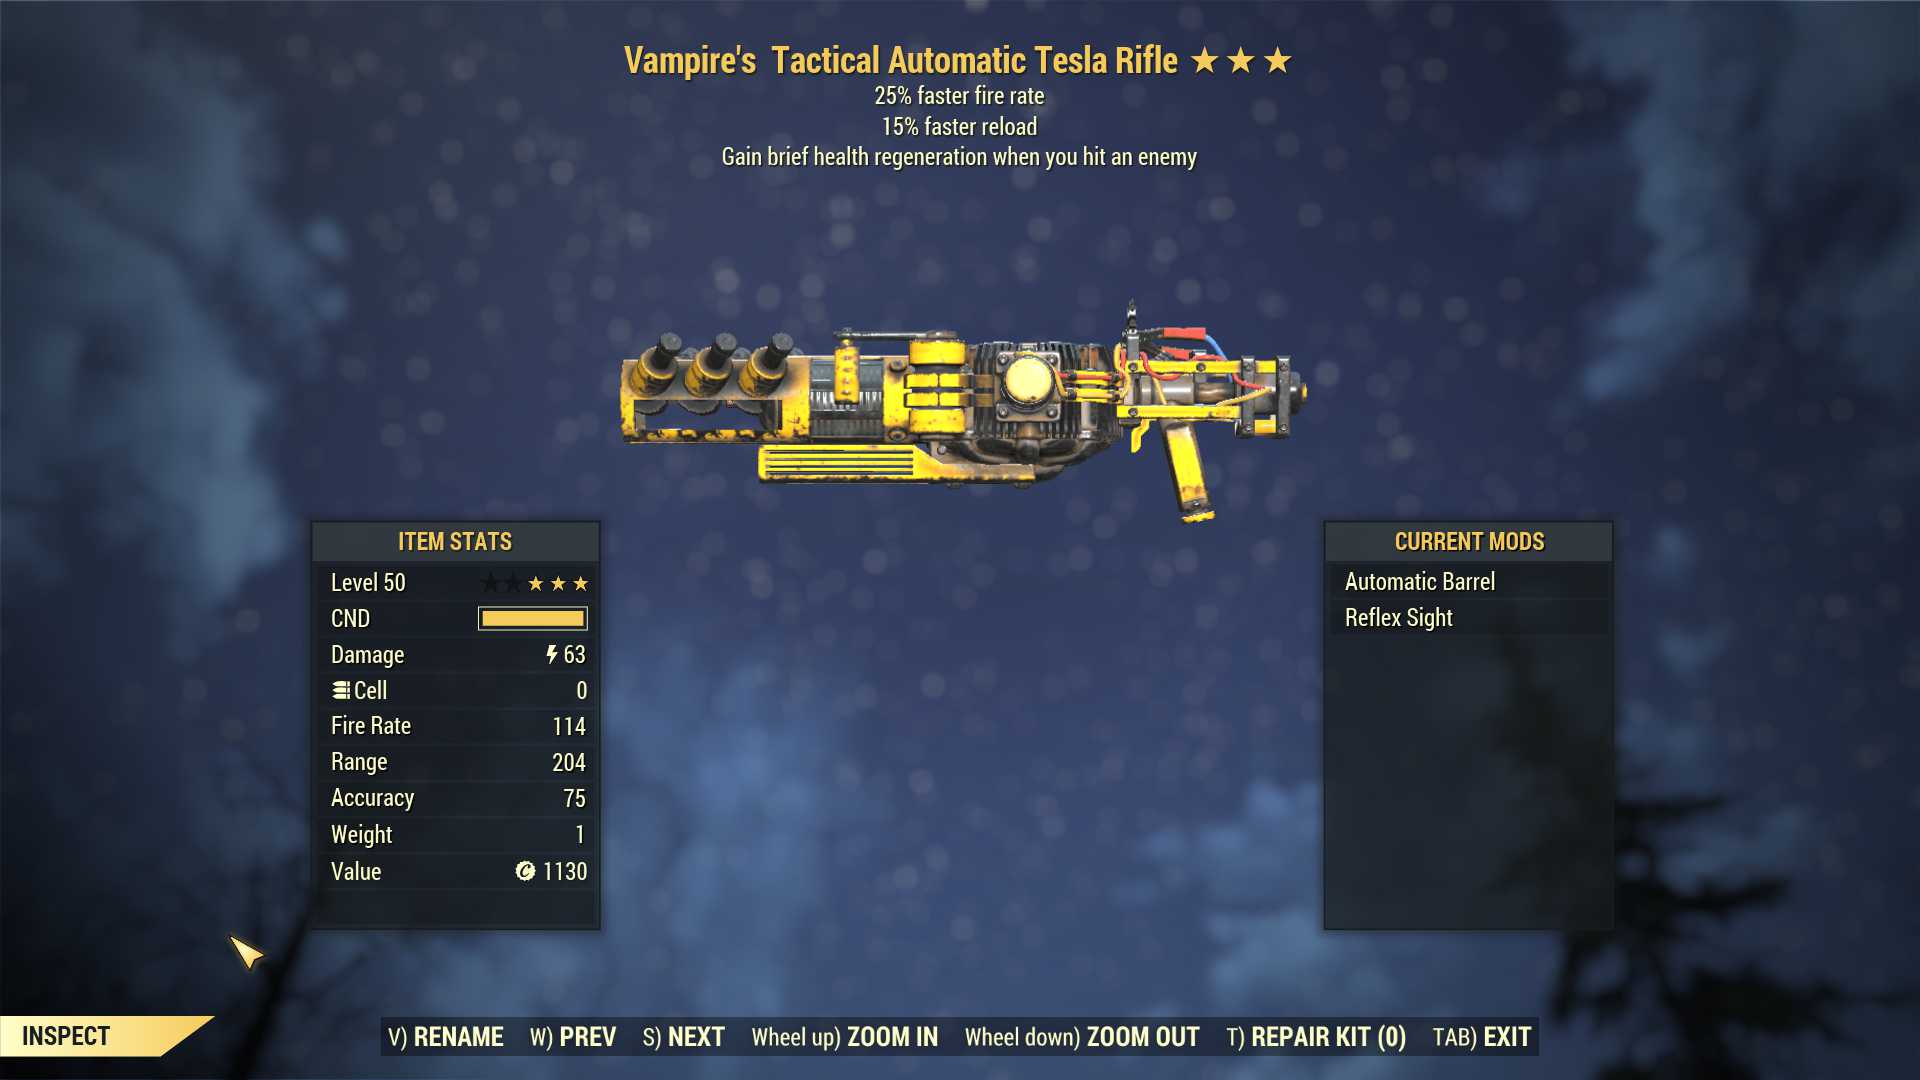 Vampire's Tesla rifle (25% faster fire rate, 15% faster reload)